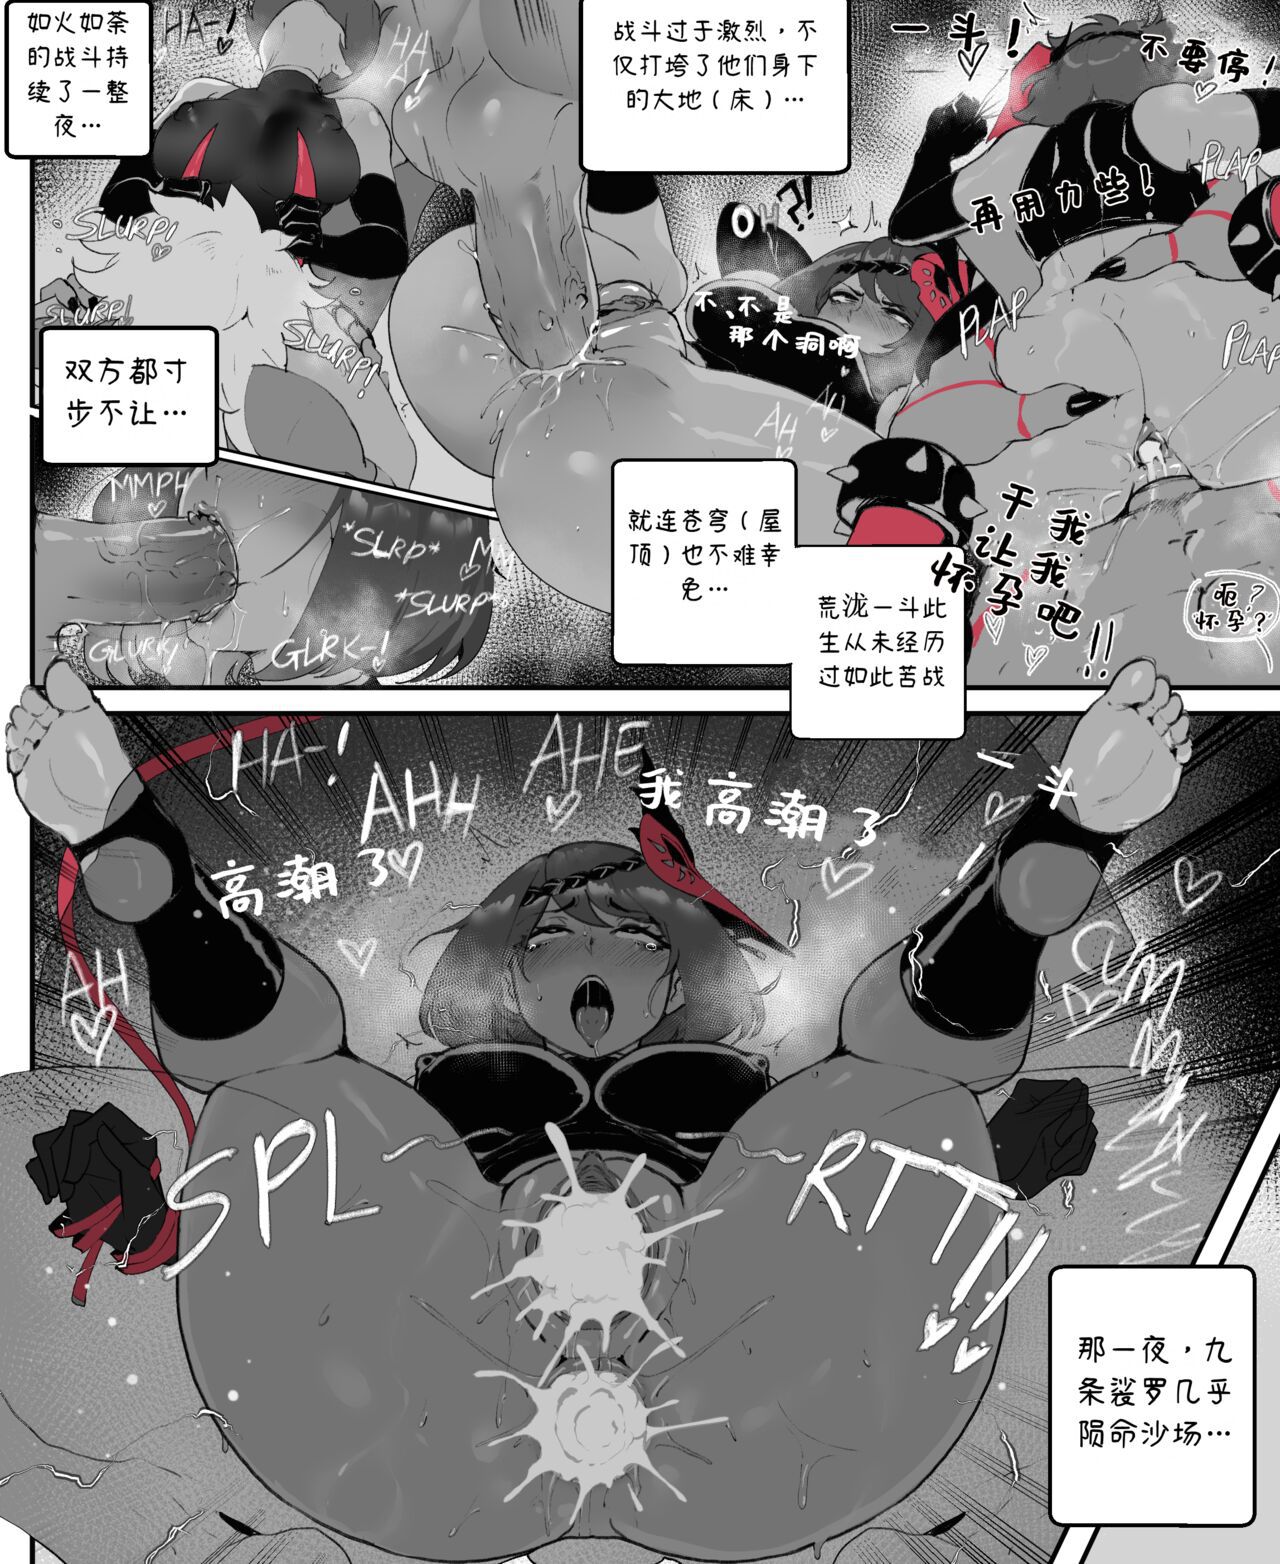 ThiccWithaQ [Chinese] [Ongoing] ThiccWithaQ 【Neko汉化】 126